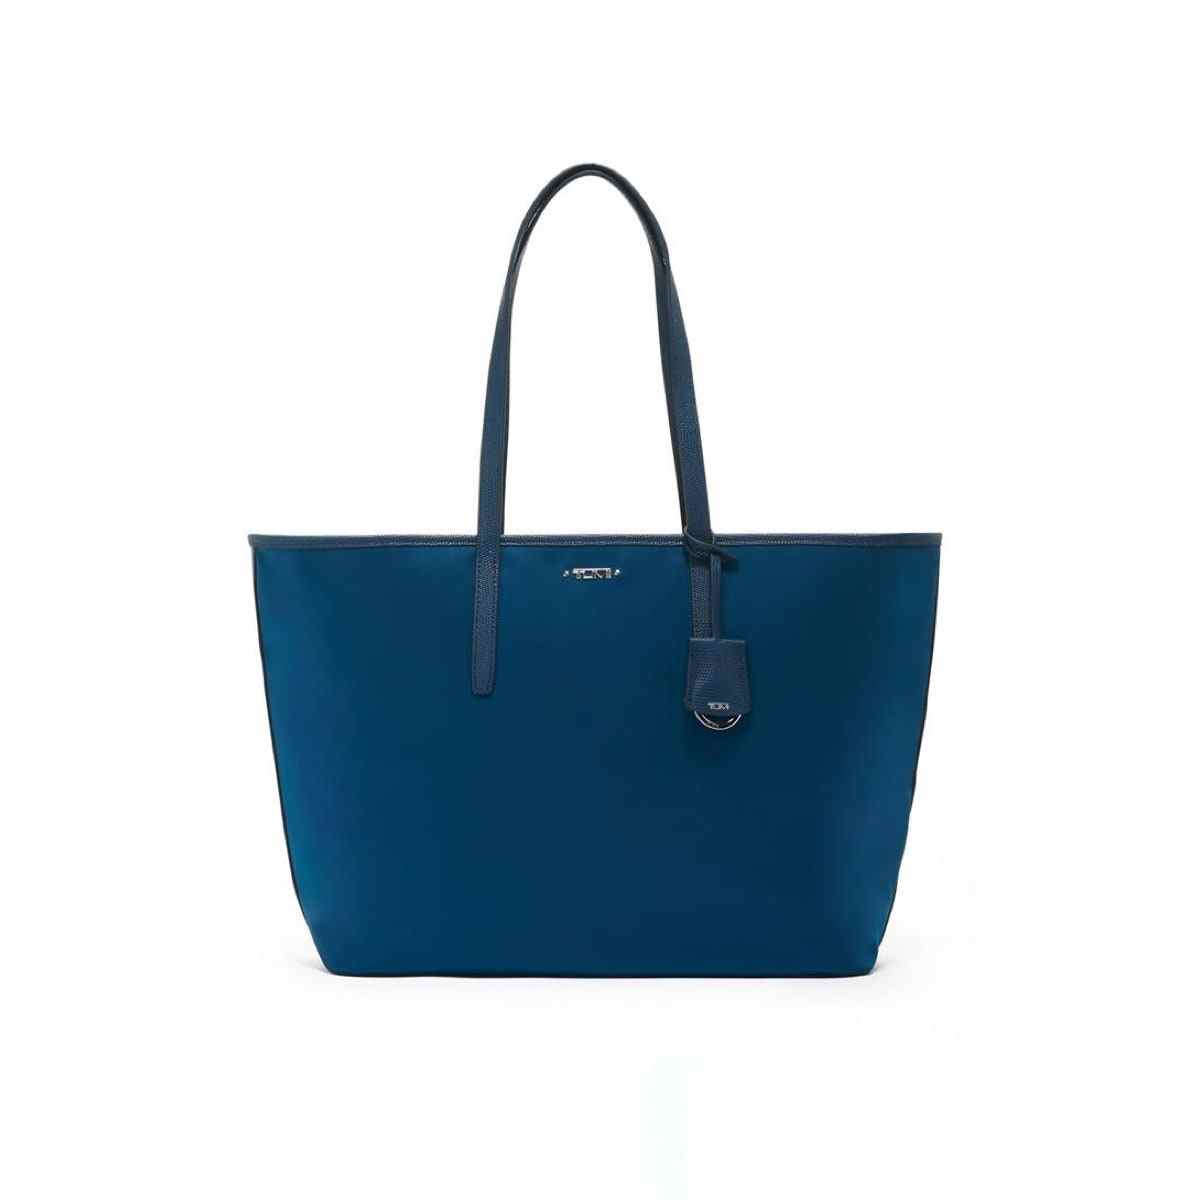 Dark turquoise Tumi Everyday Tote with leather straps on white background